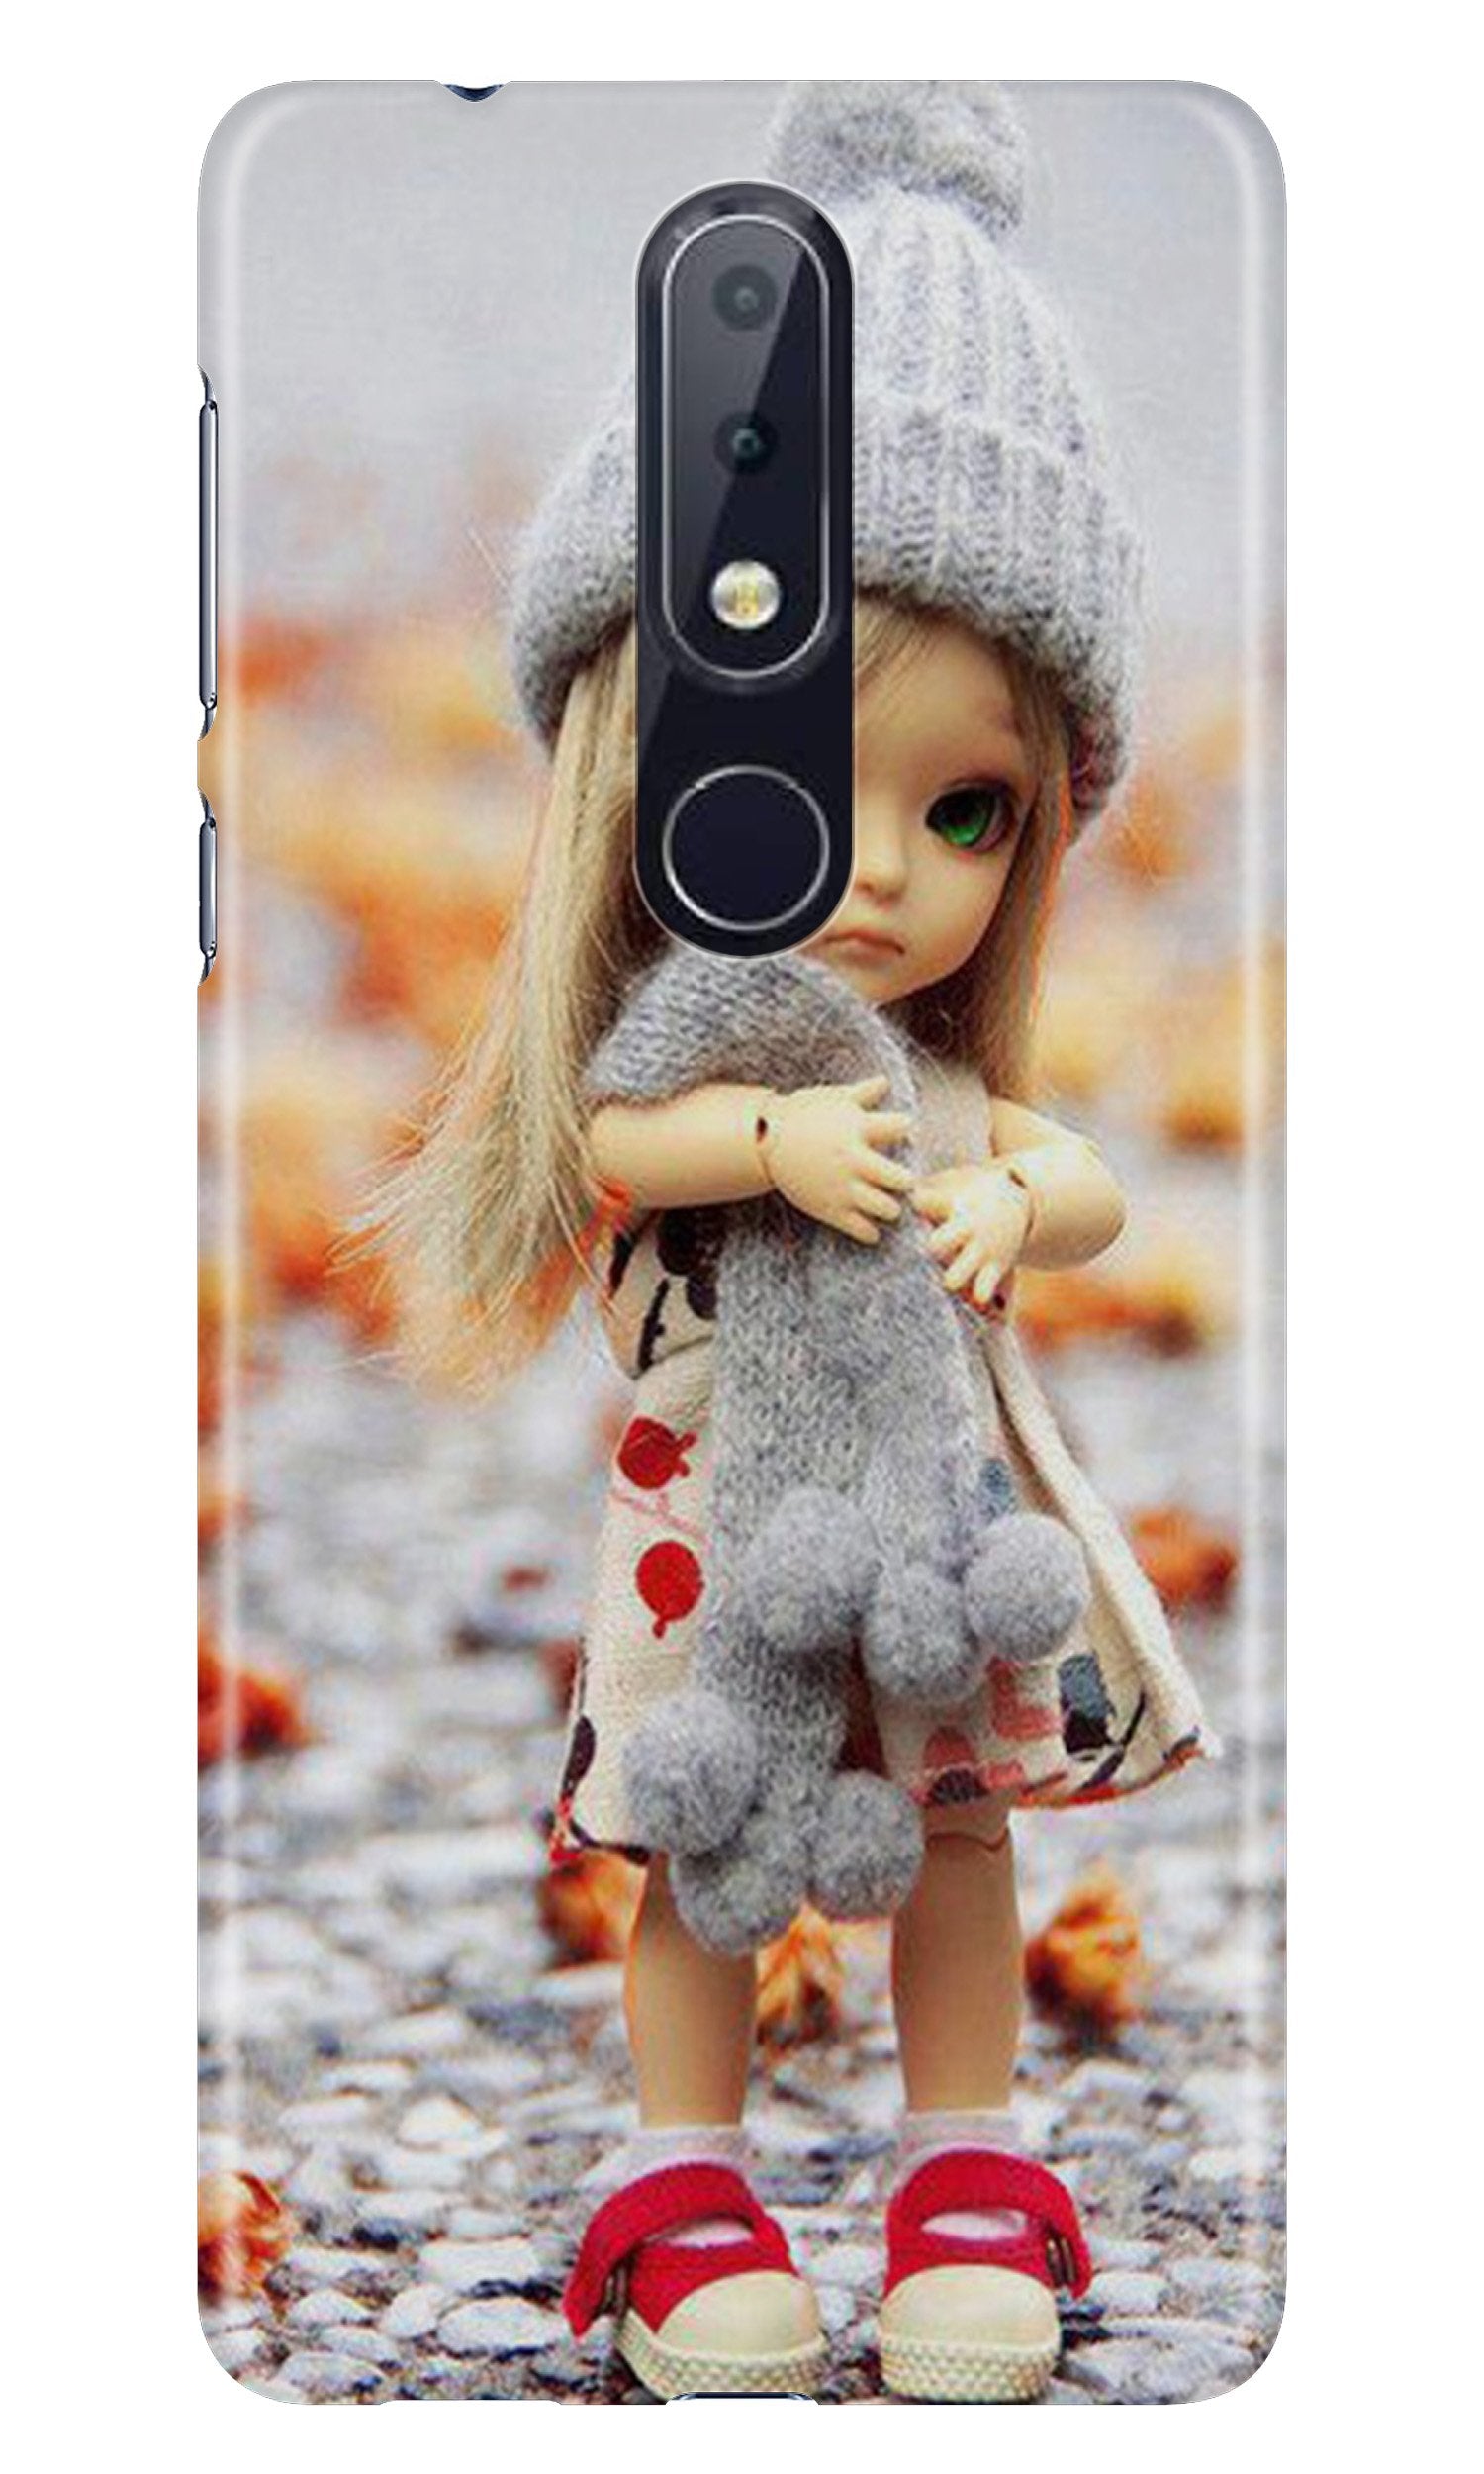 Cute Doll Case for Nokia 7.1